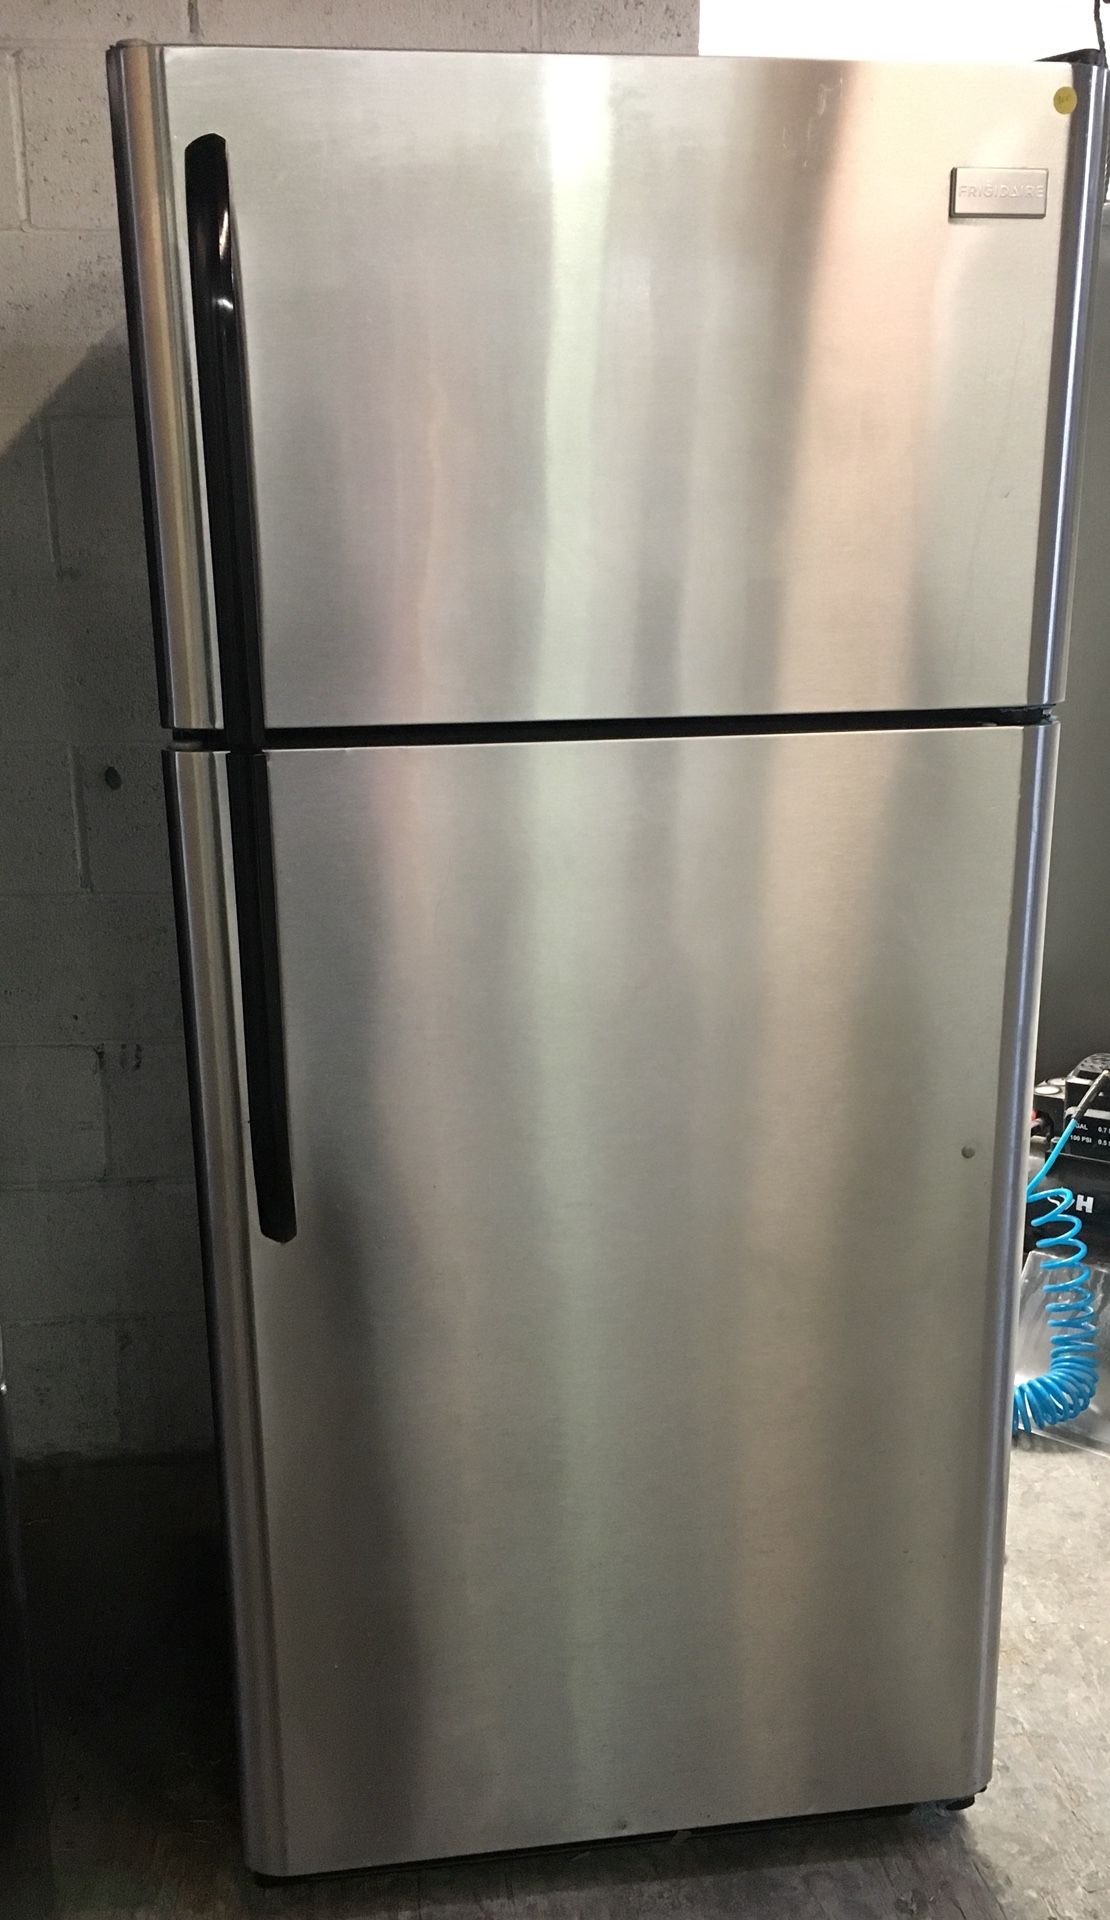 STAINLESS STEEL TOP FREEZER >FRIGIDAIRE>REFRIGERATOR APT SIZE DELIVERY SAME DAY👉🏻🚛🚛